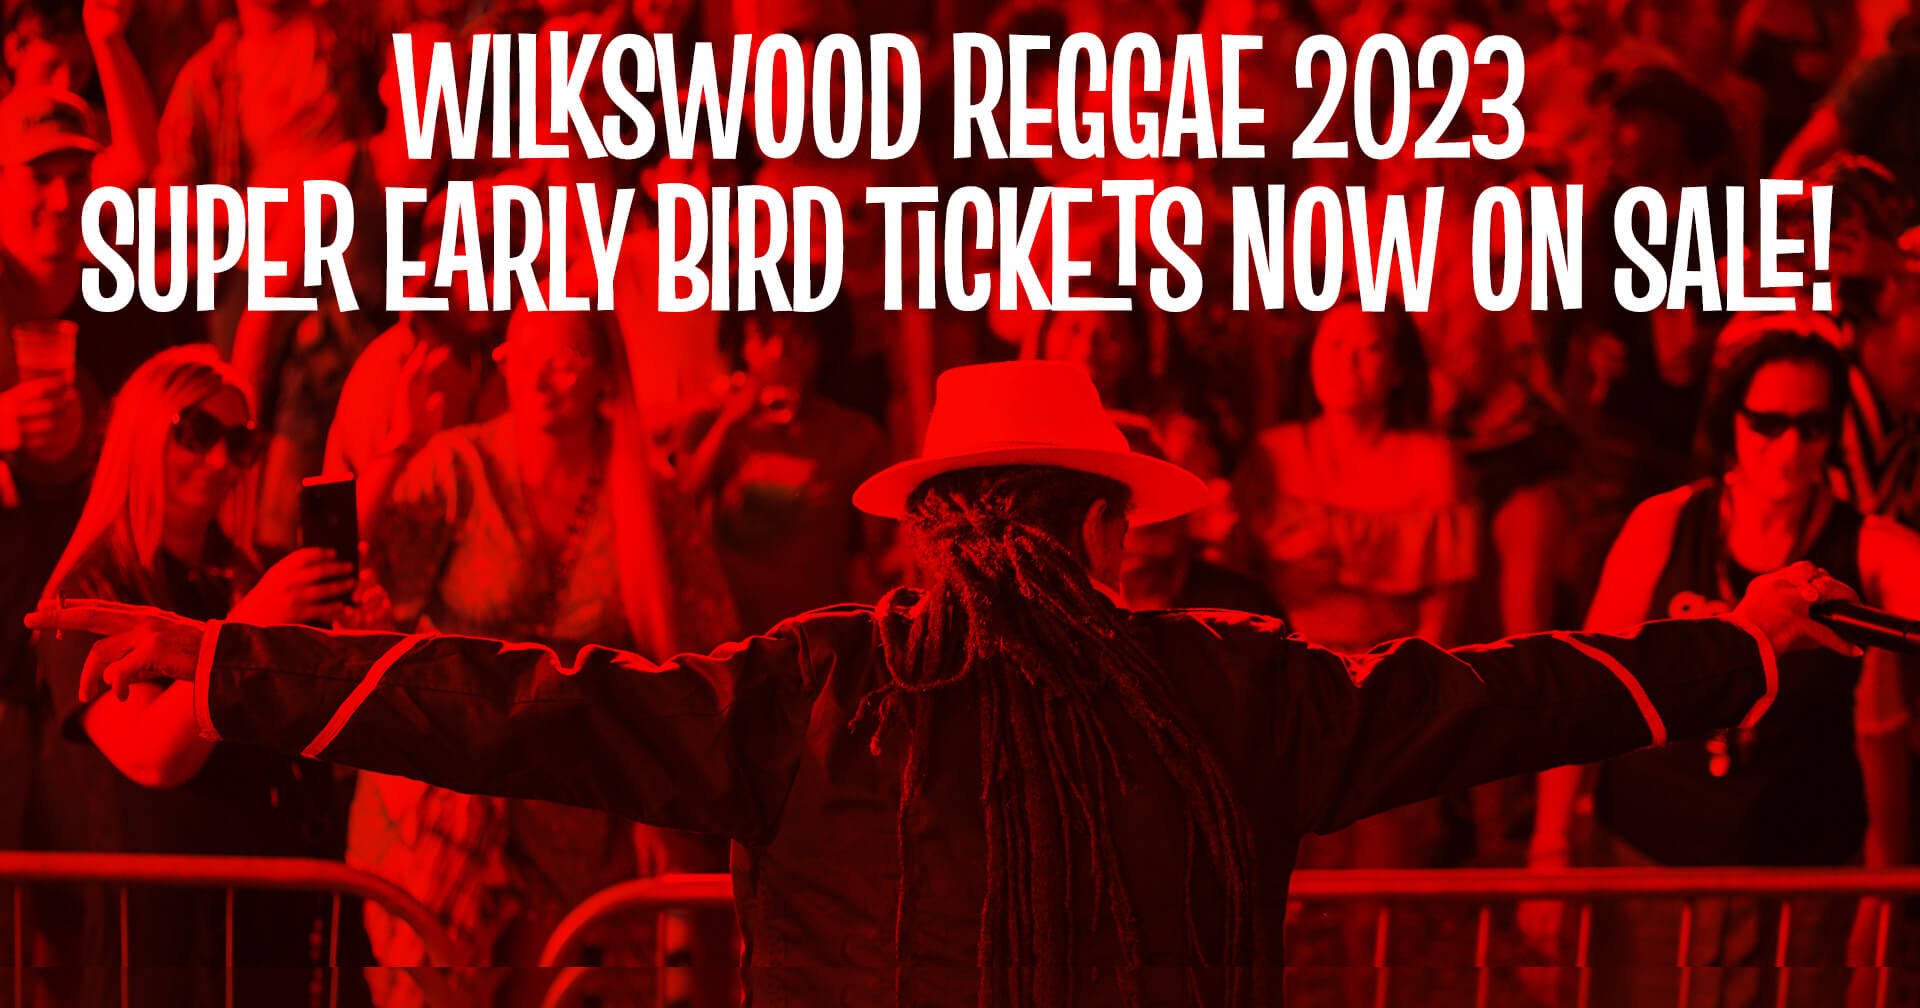 Super Early Bird Tickets Now On Sale for Wilkswood Reggae Festival 2023